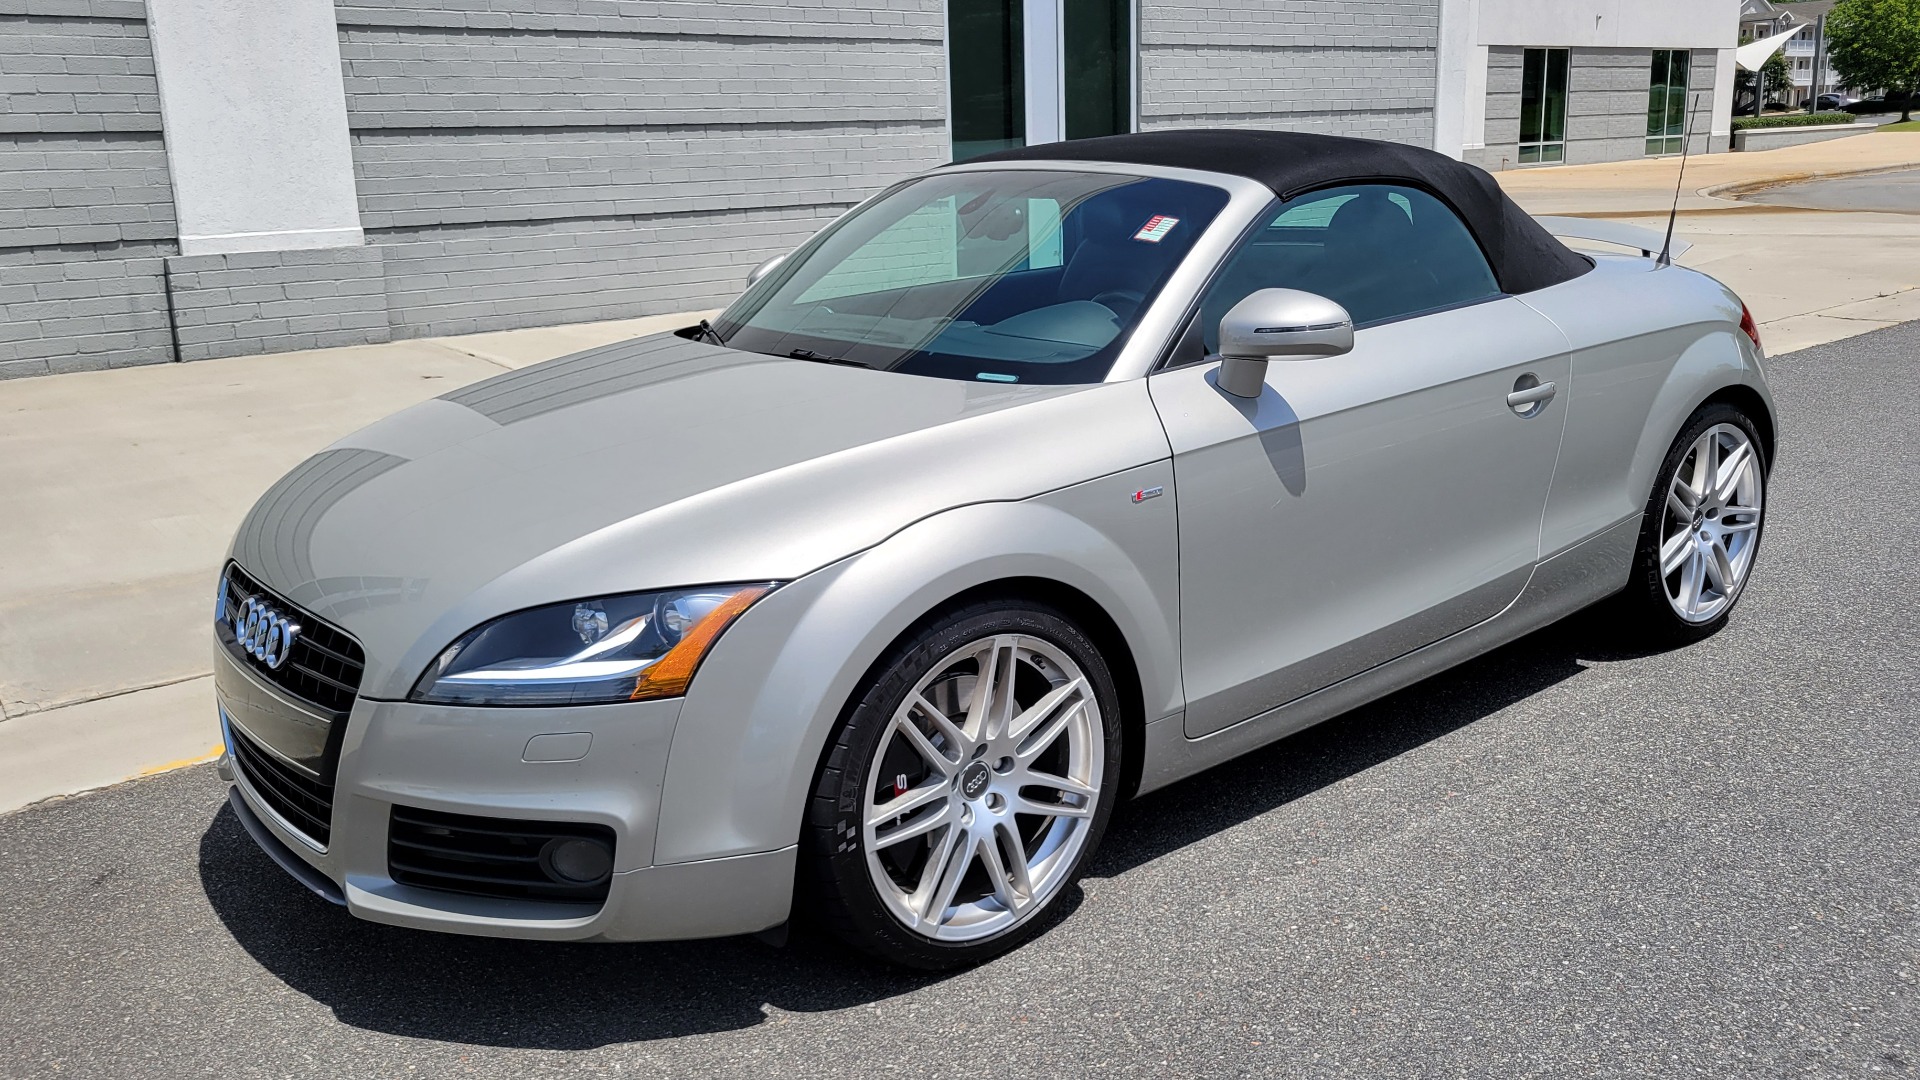 Used 2008 Audi TT 3.2L CONVERTIBLE / MANUAL / 19IN WHEELS / LOW MILES for sale Sold at Formula Imports in Charlotte NC 28227 4